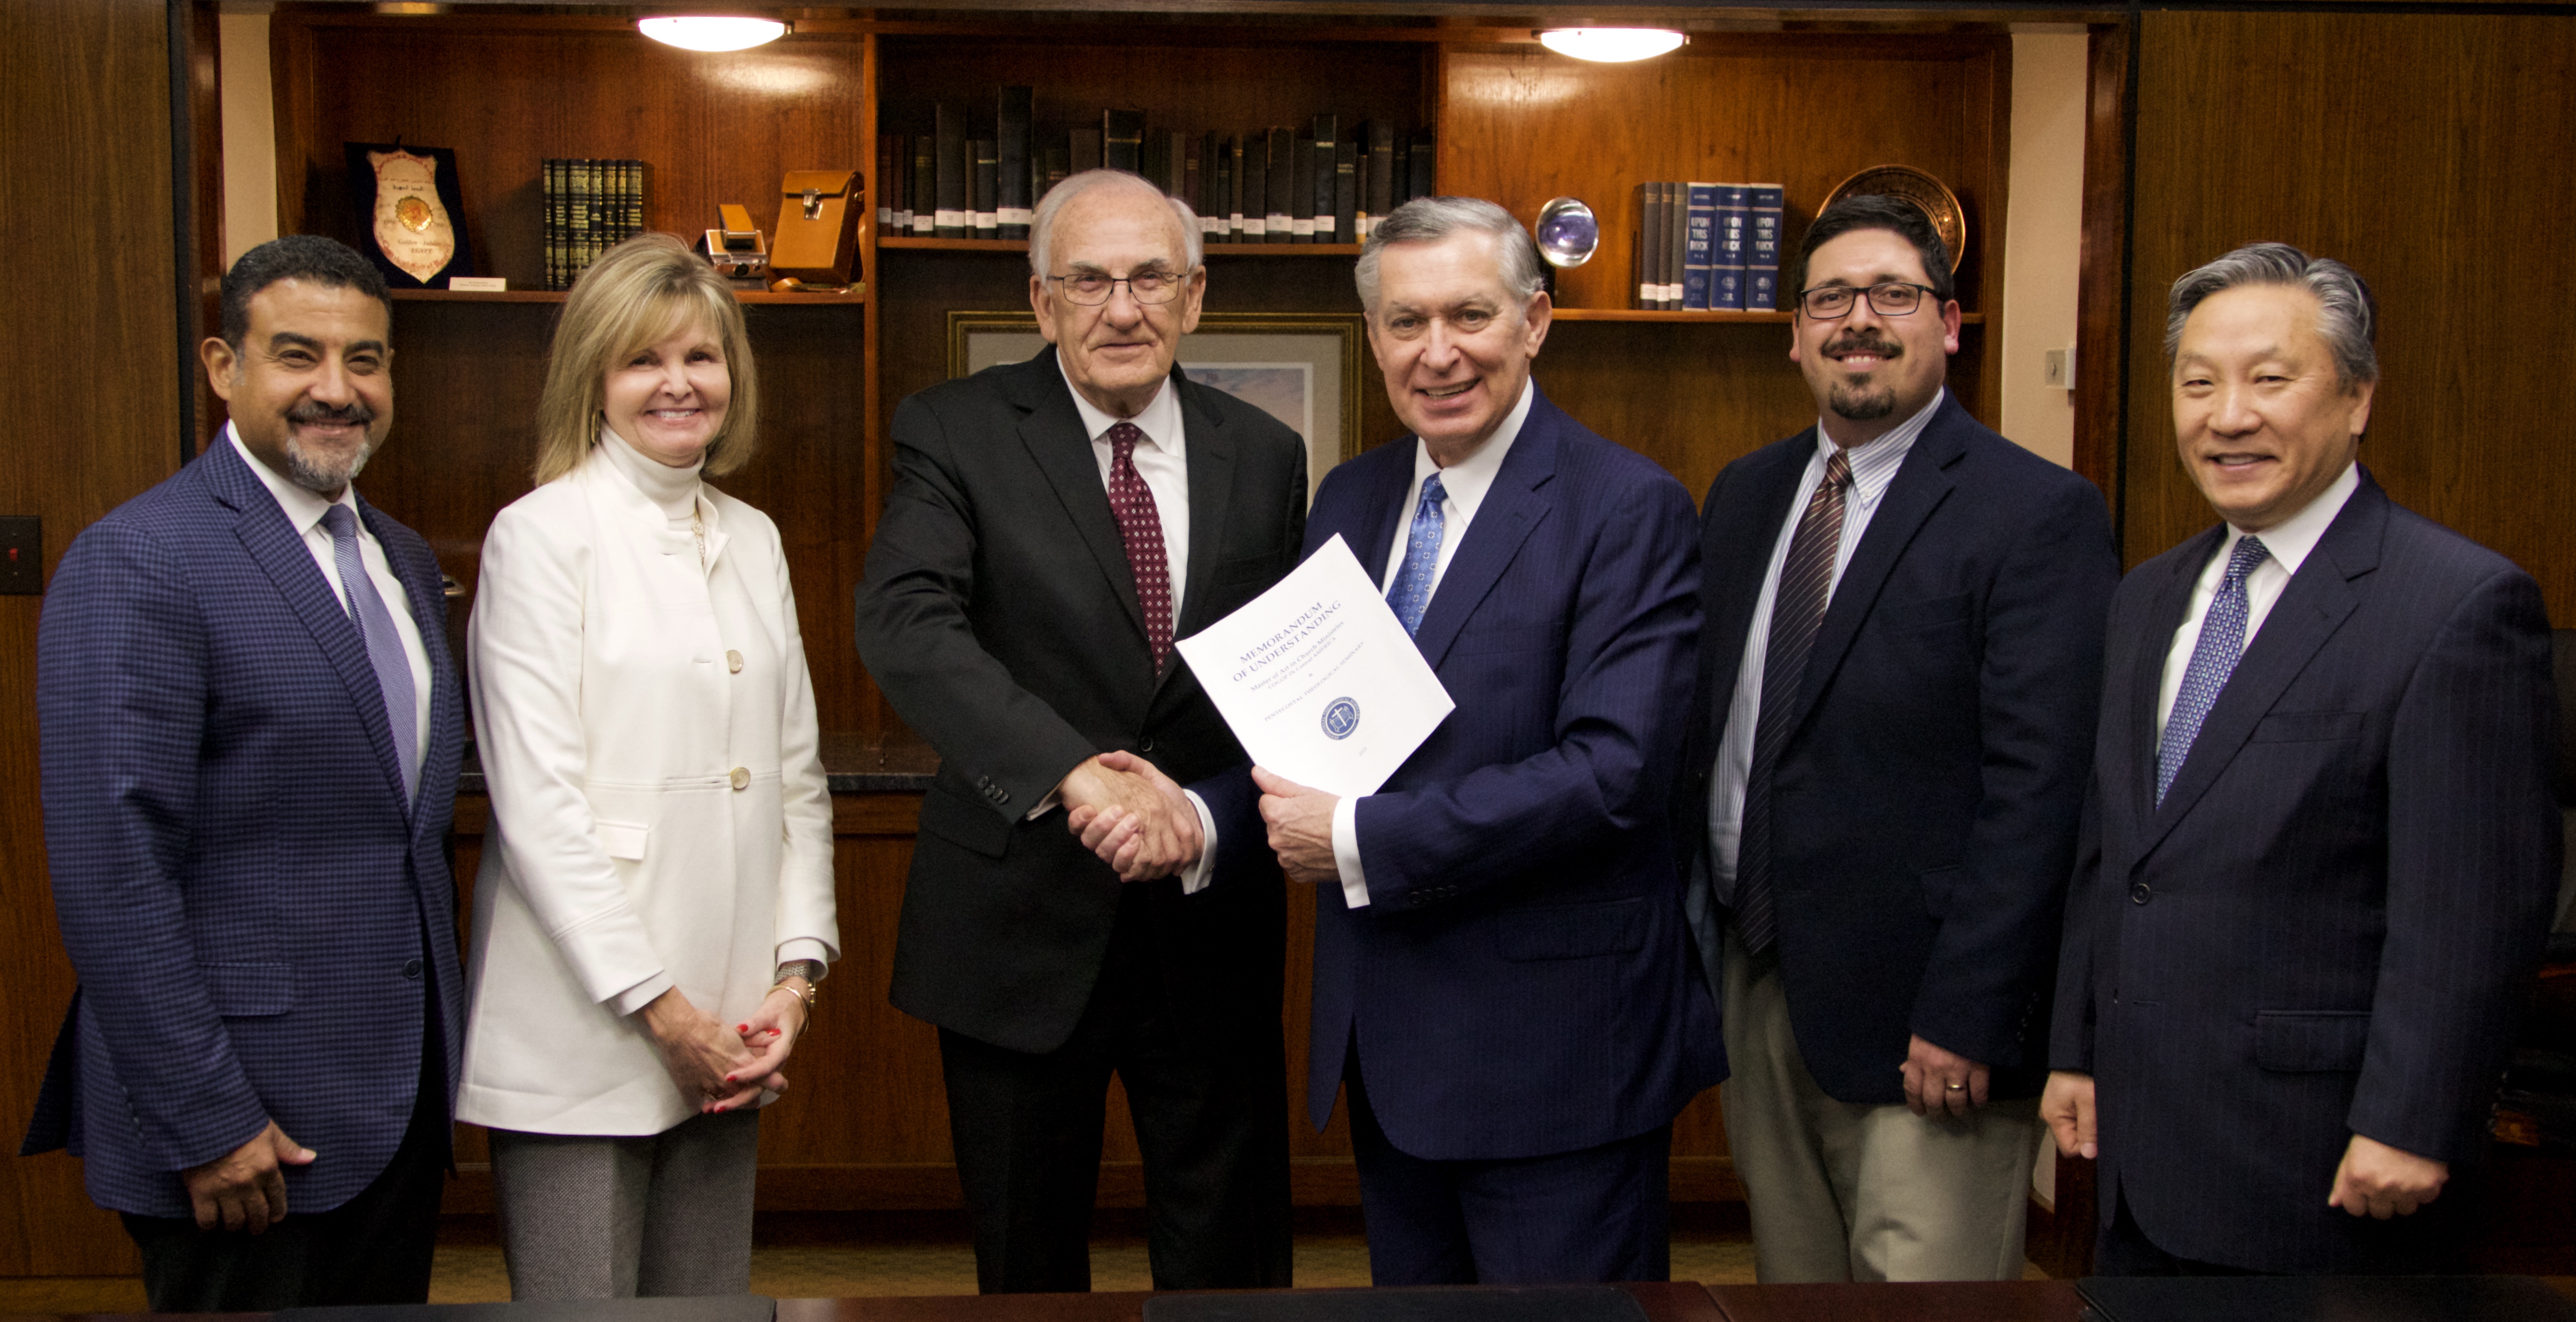 COGOP/PTS AGREEMENT SIGNED TO PROVIDE MASTERS PROGRAMS IN CENTRAL AND SOUTH AMERICA